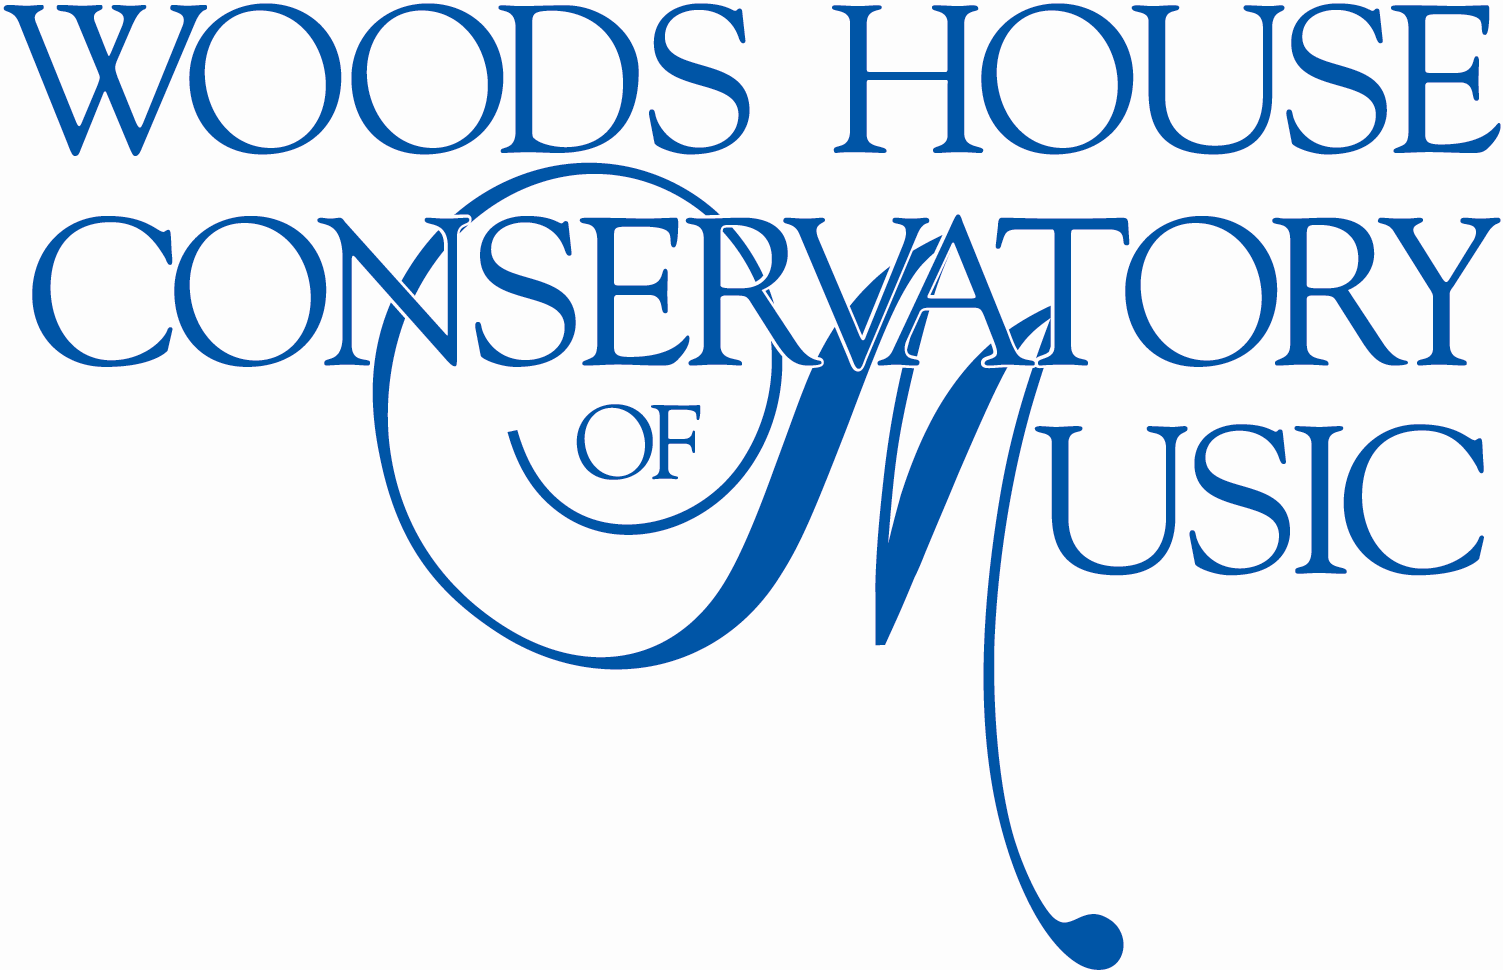 Woods House Conservatory of music.png